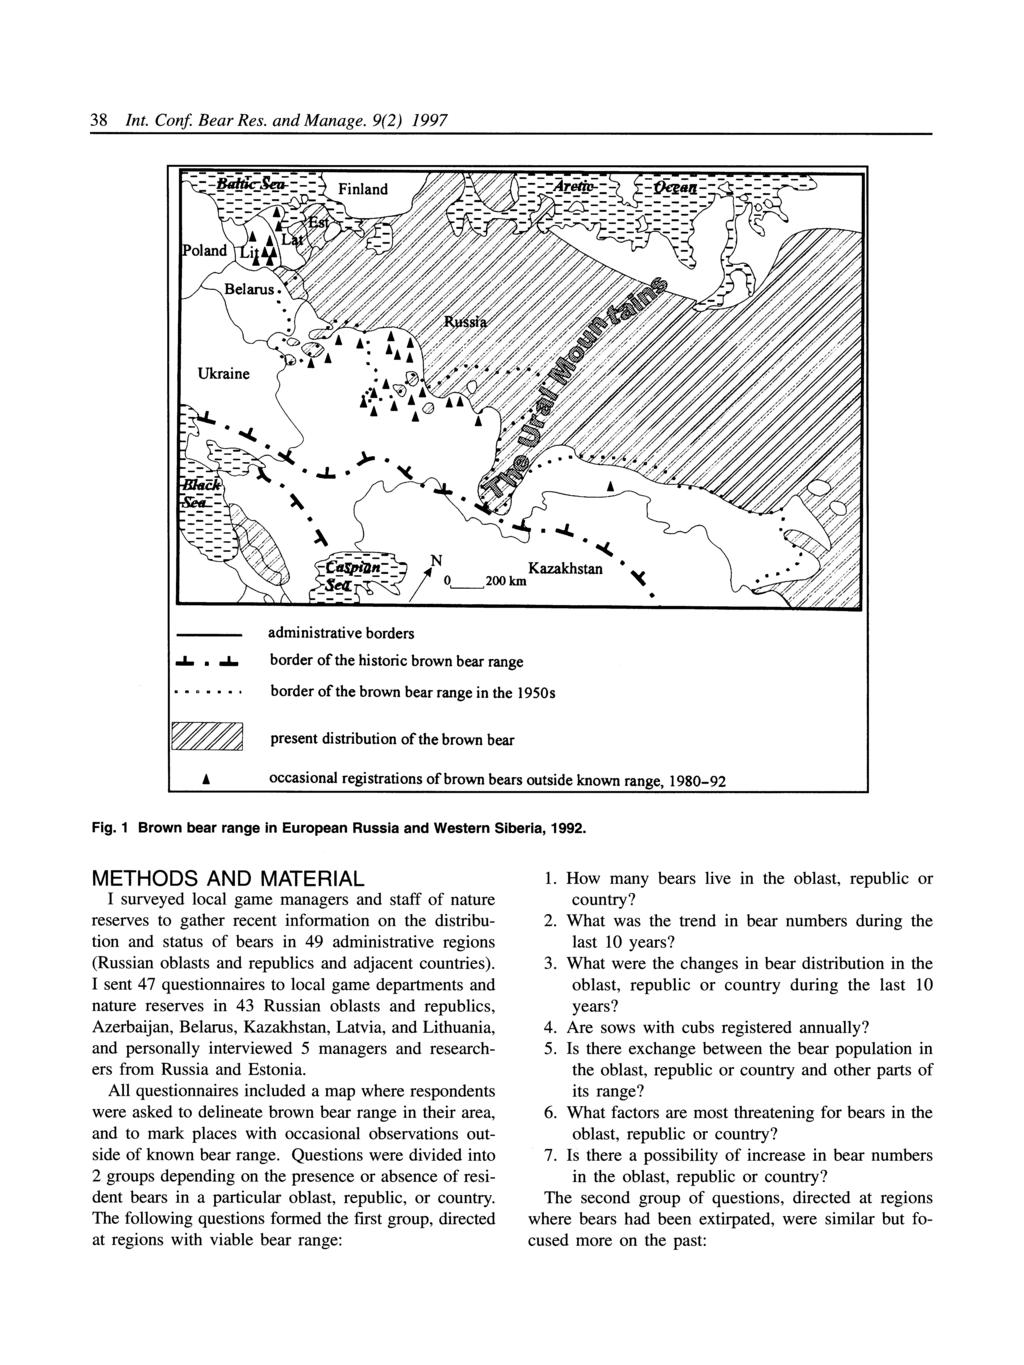 38 Int. Conf Bear Res. and Manage. 9(2) 1997 Fig. 1 Brown bear range in European Russia and Western Siberia, 1992.